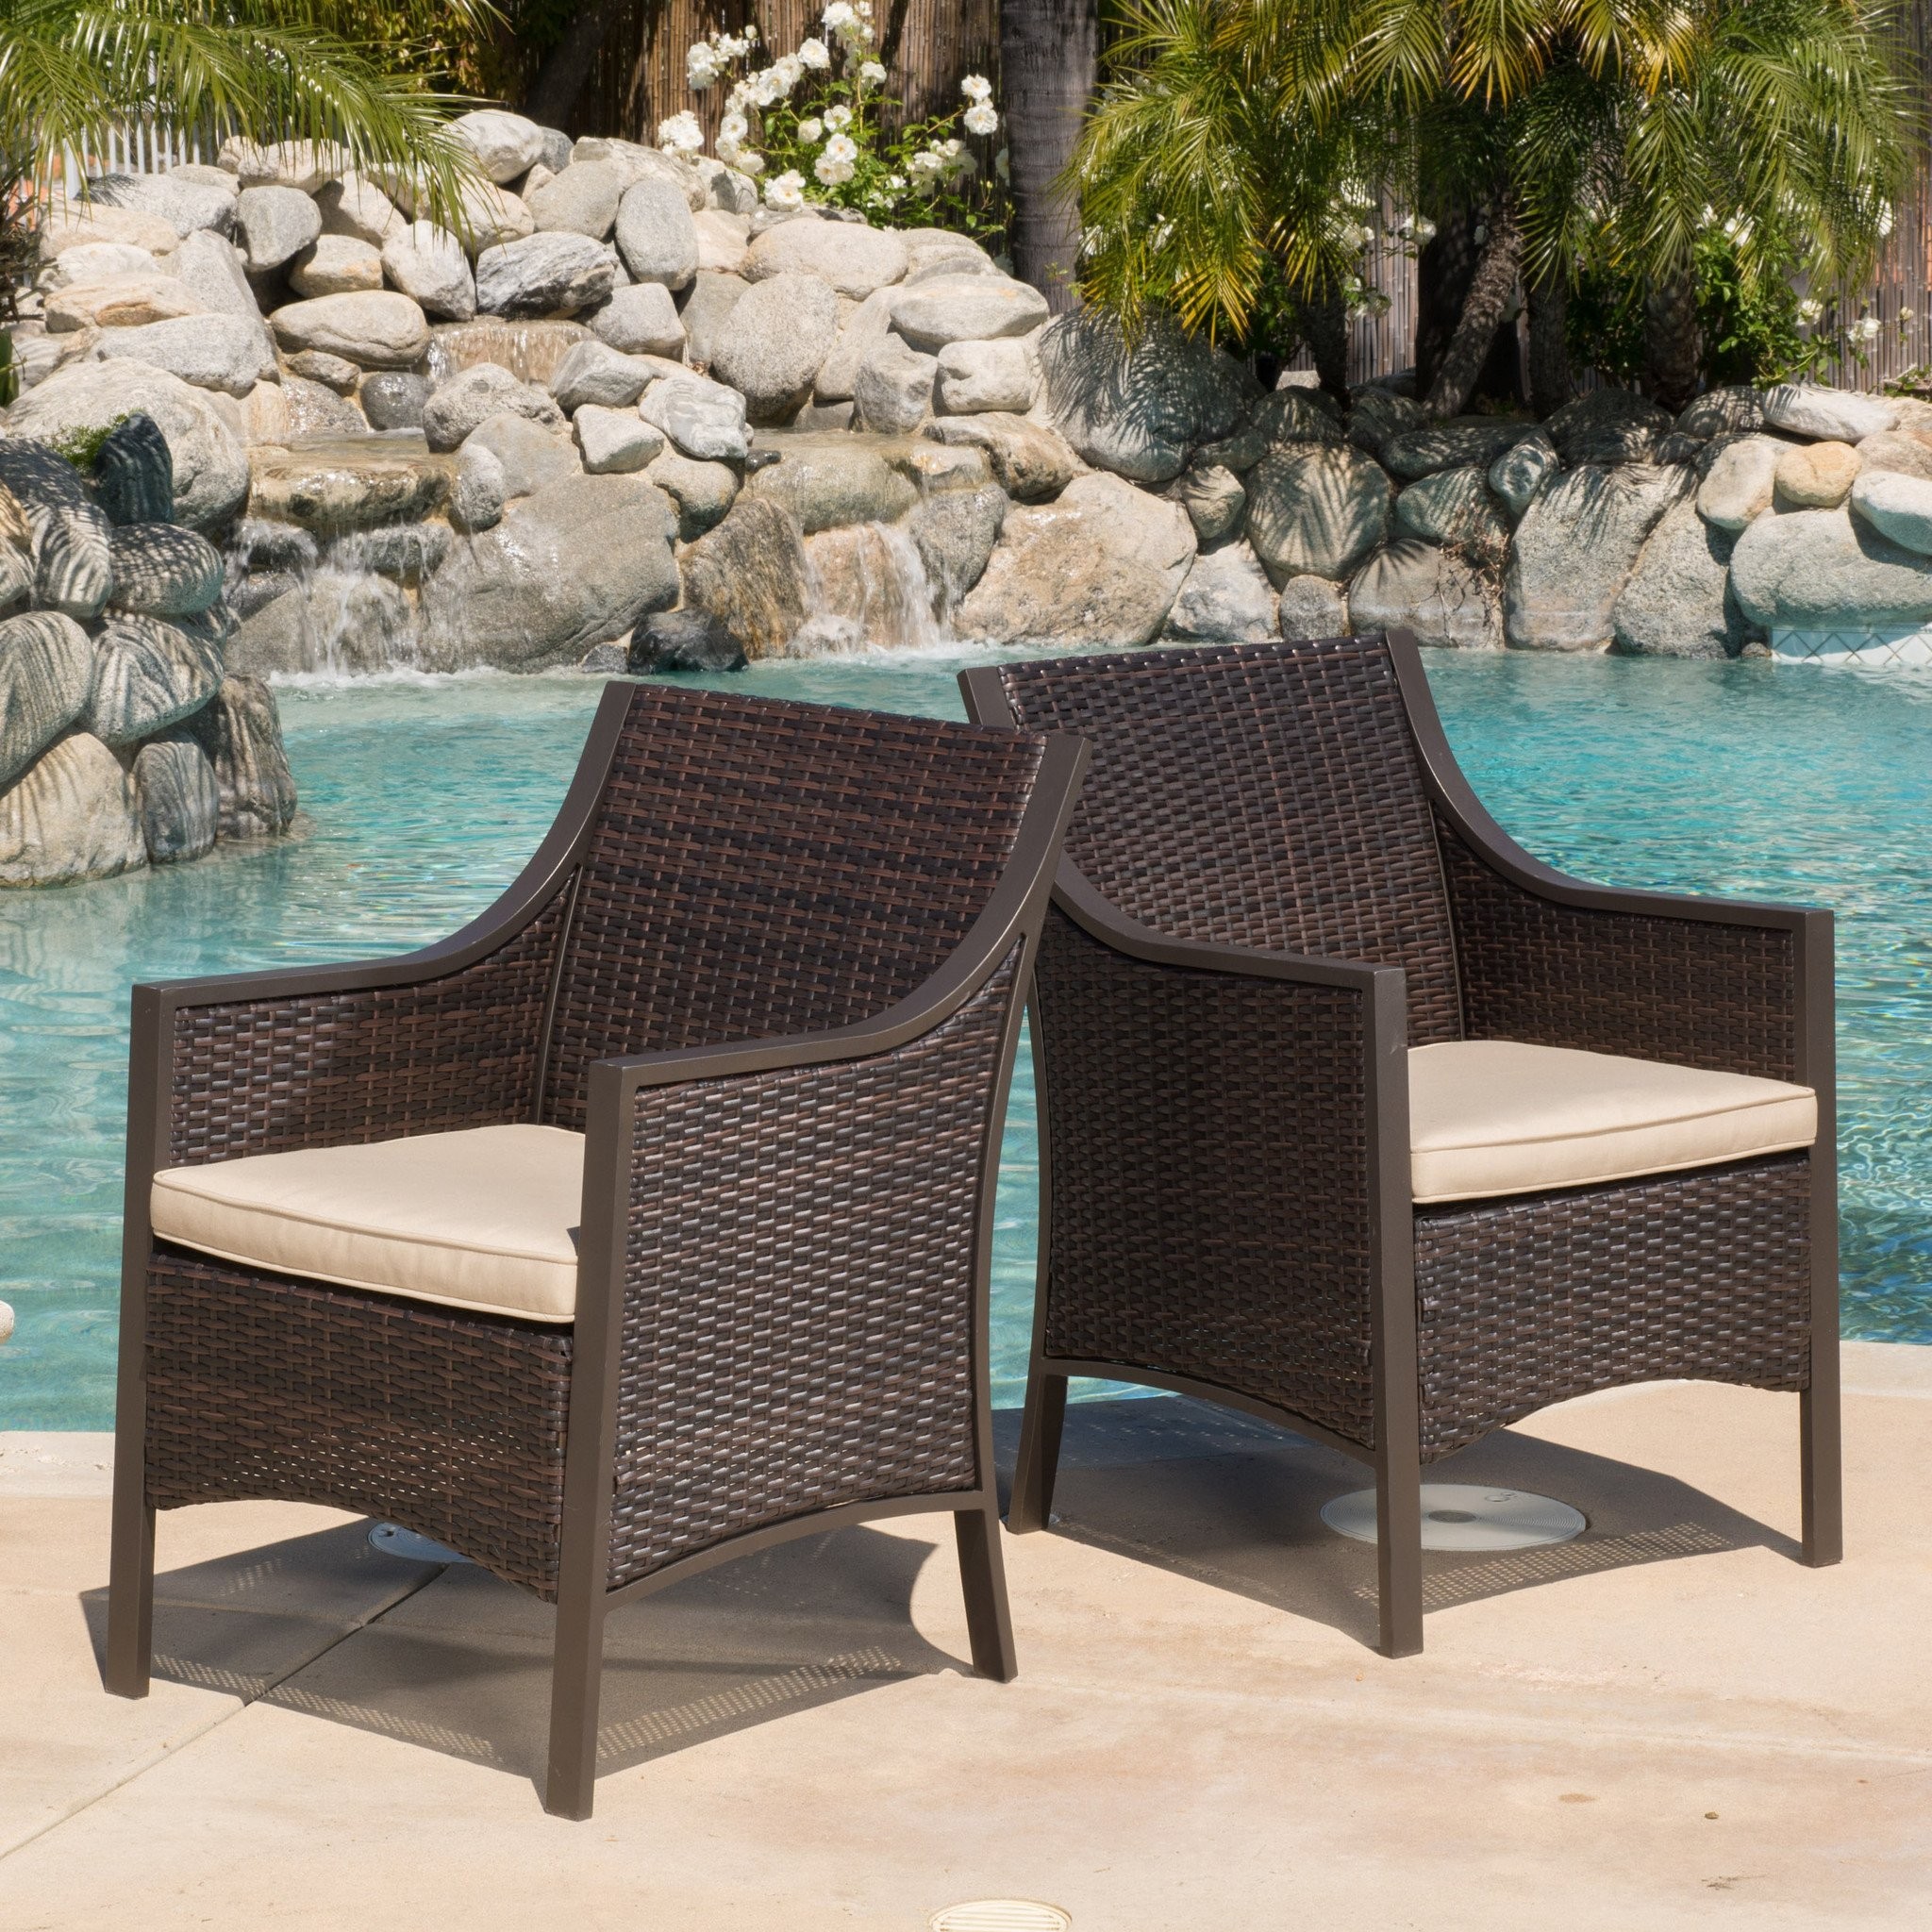 Orchard Outdoor Brown Wicker Dining Chair w/ Cushi...